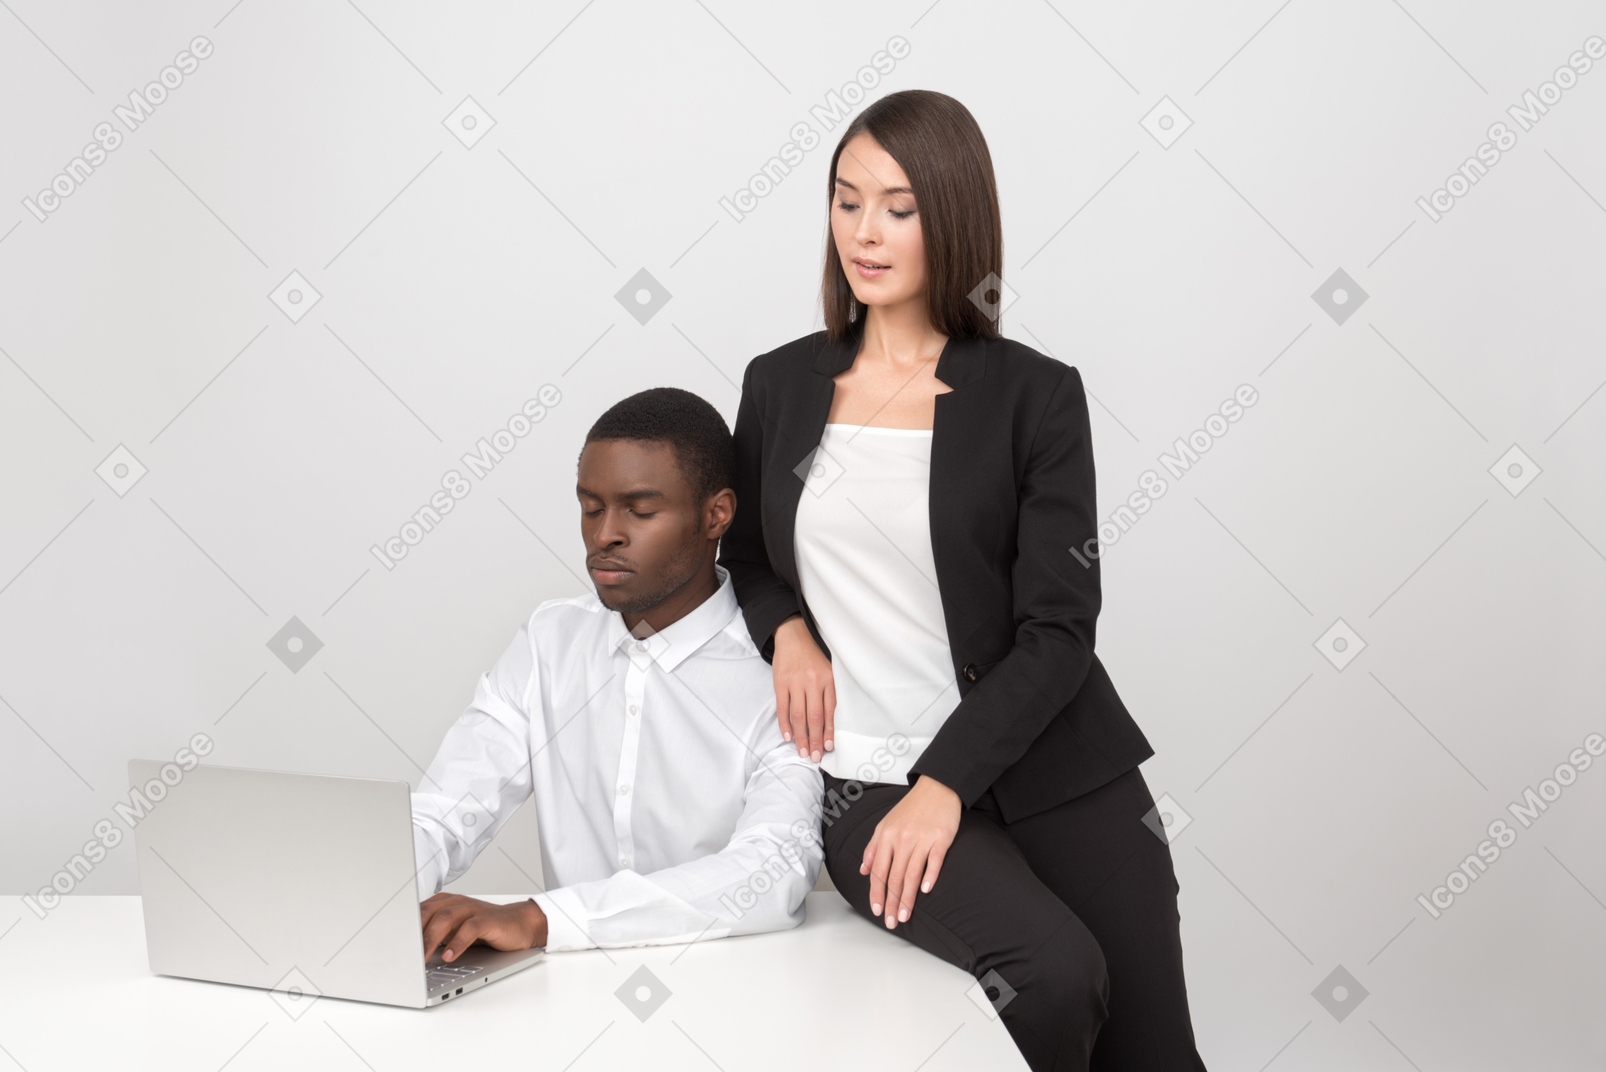 Attractive asian woman flirting with her colleague in the workplace